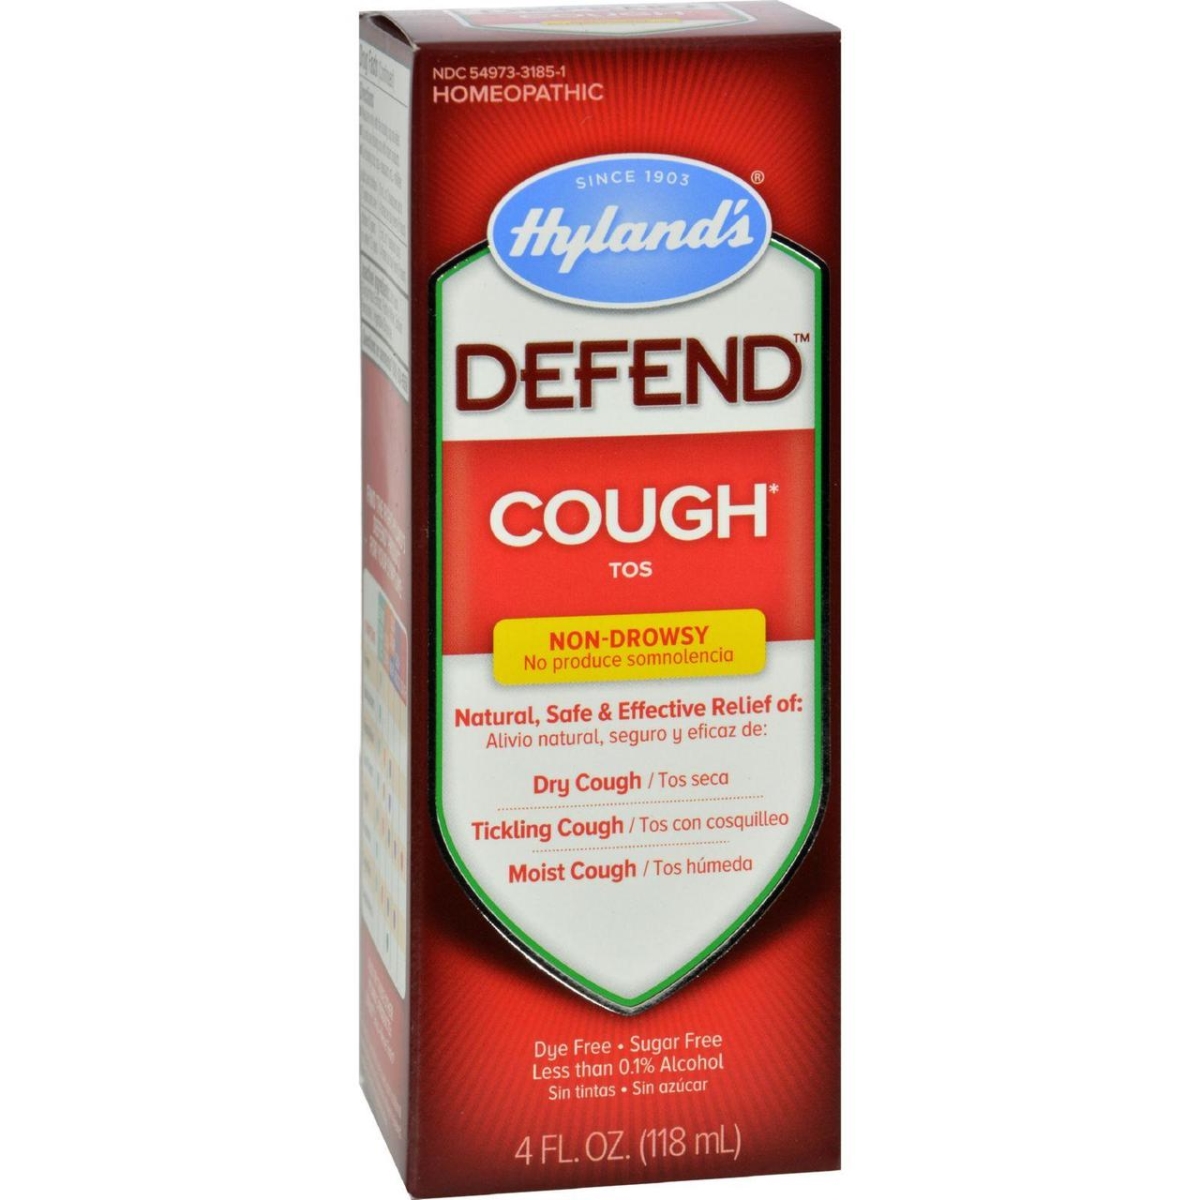 Hg1608785 4 Fl Oz Homepathic Cough Syrup - Defend